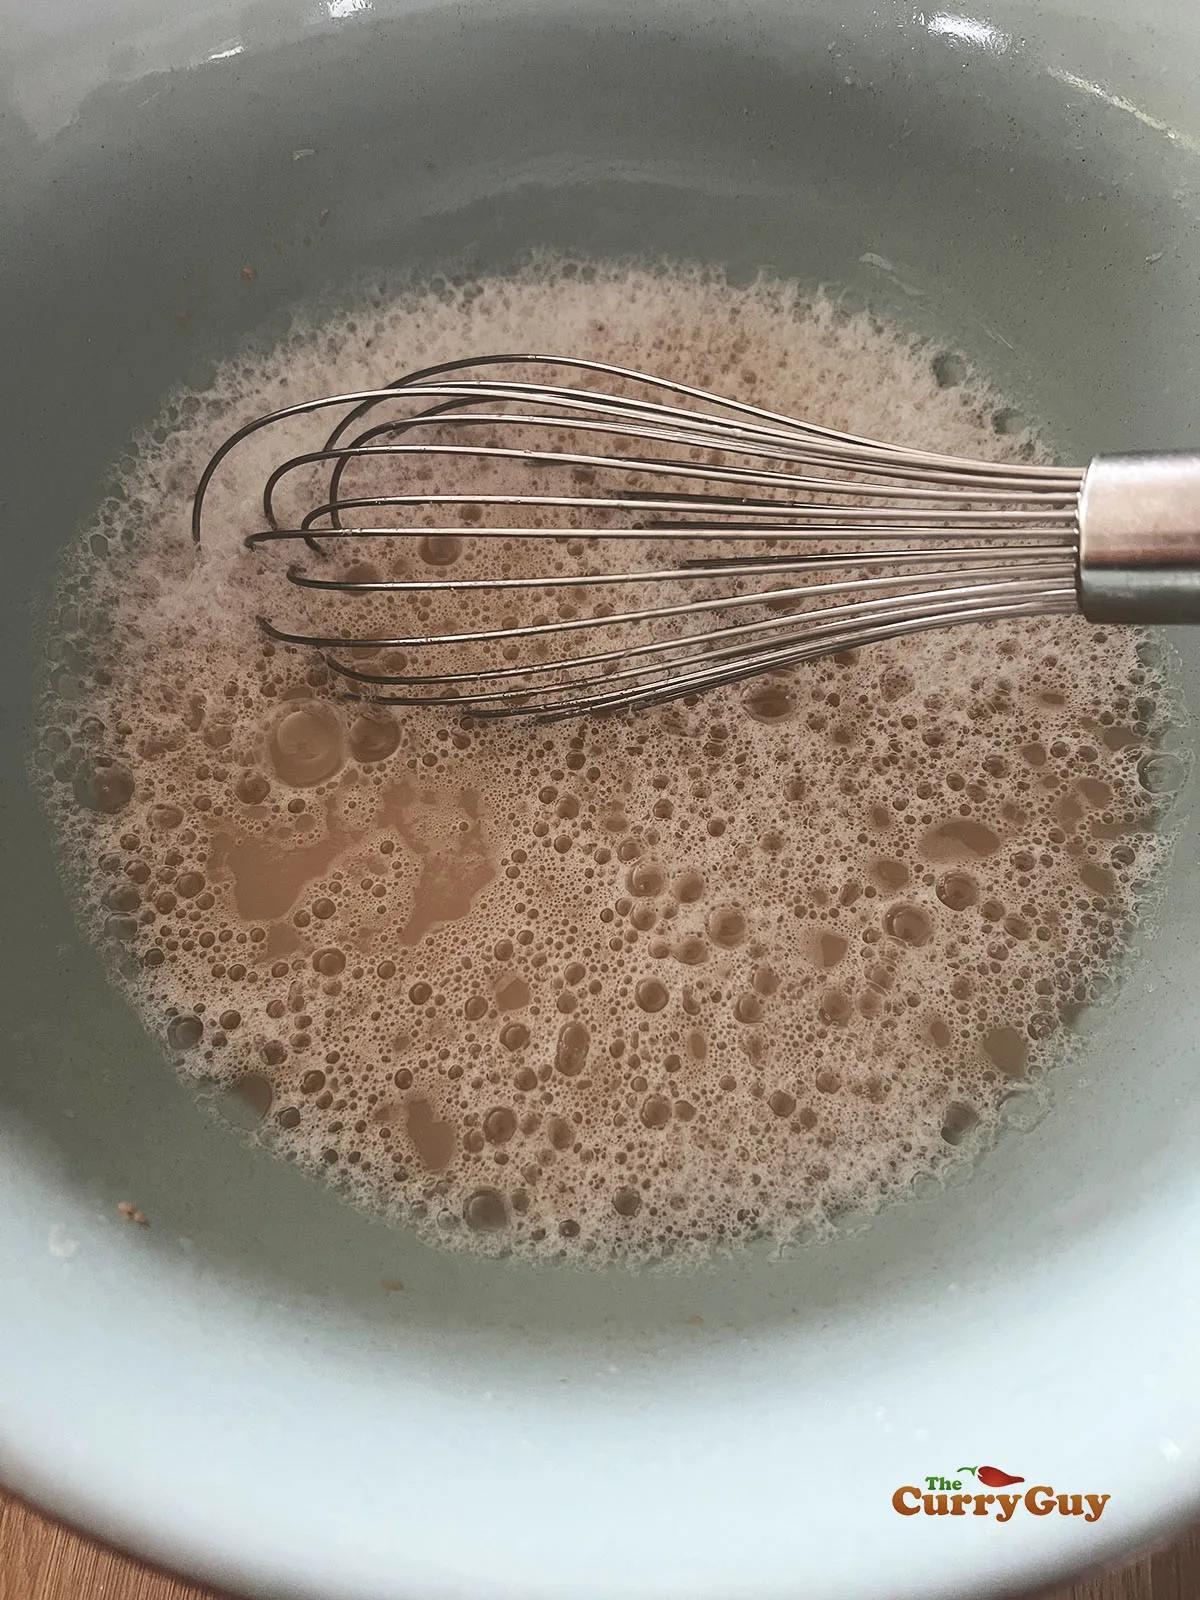 Frothy yeast, sugar and water mixture.